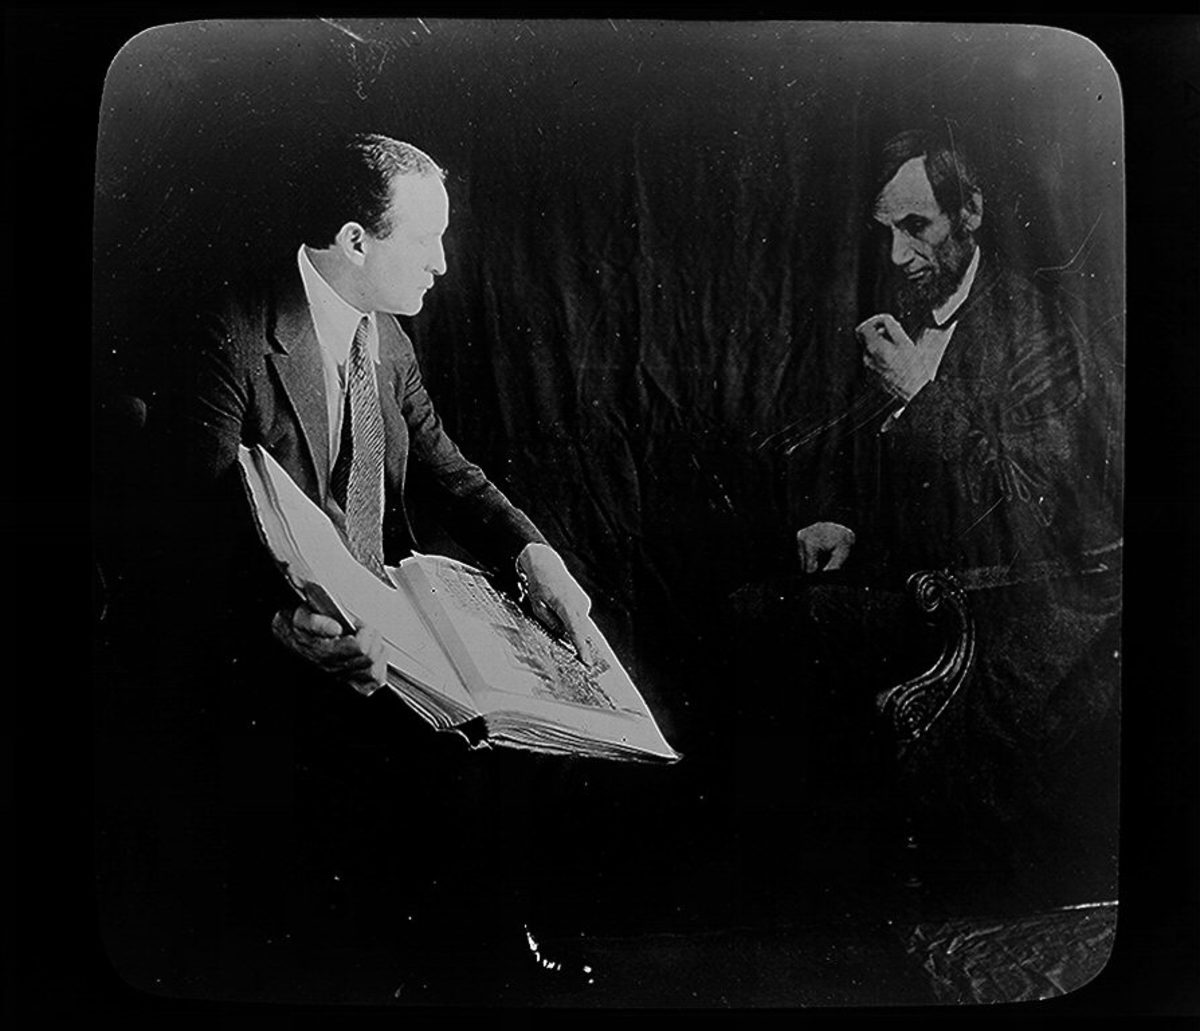 Harry Houdini and the ghost of Abraham Lincoln, in a photo created by the famous illusionist to debunk spirit photographs. This was published between 1920 and 1930.